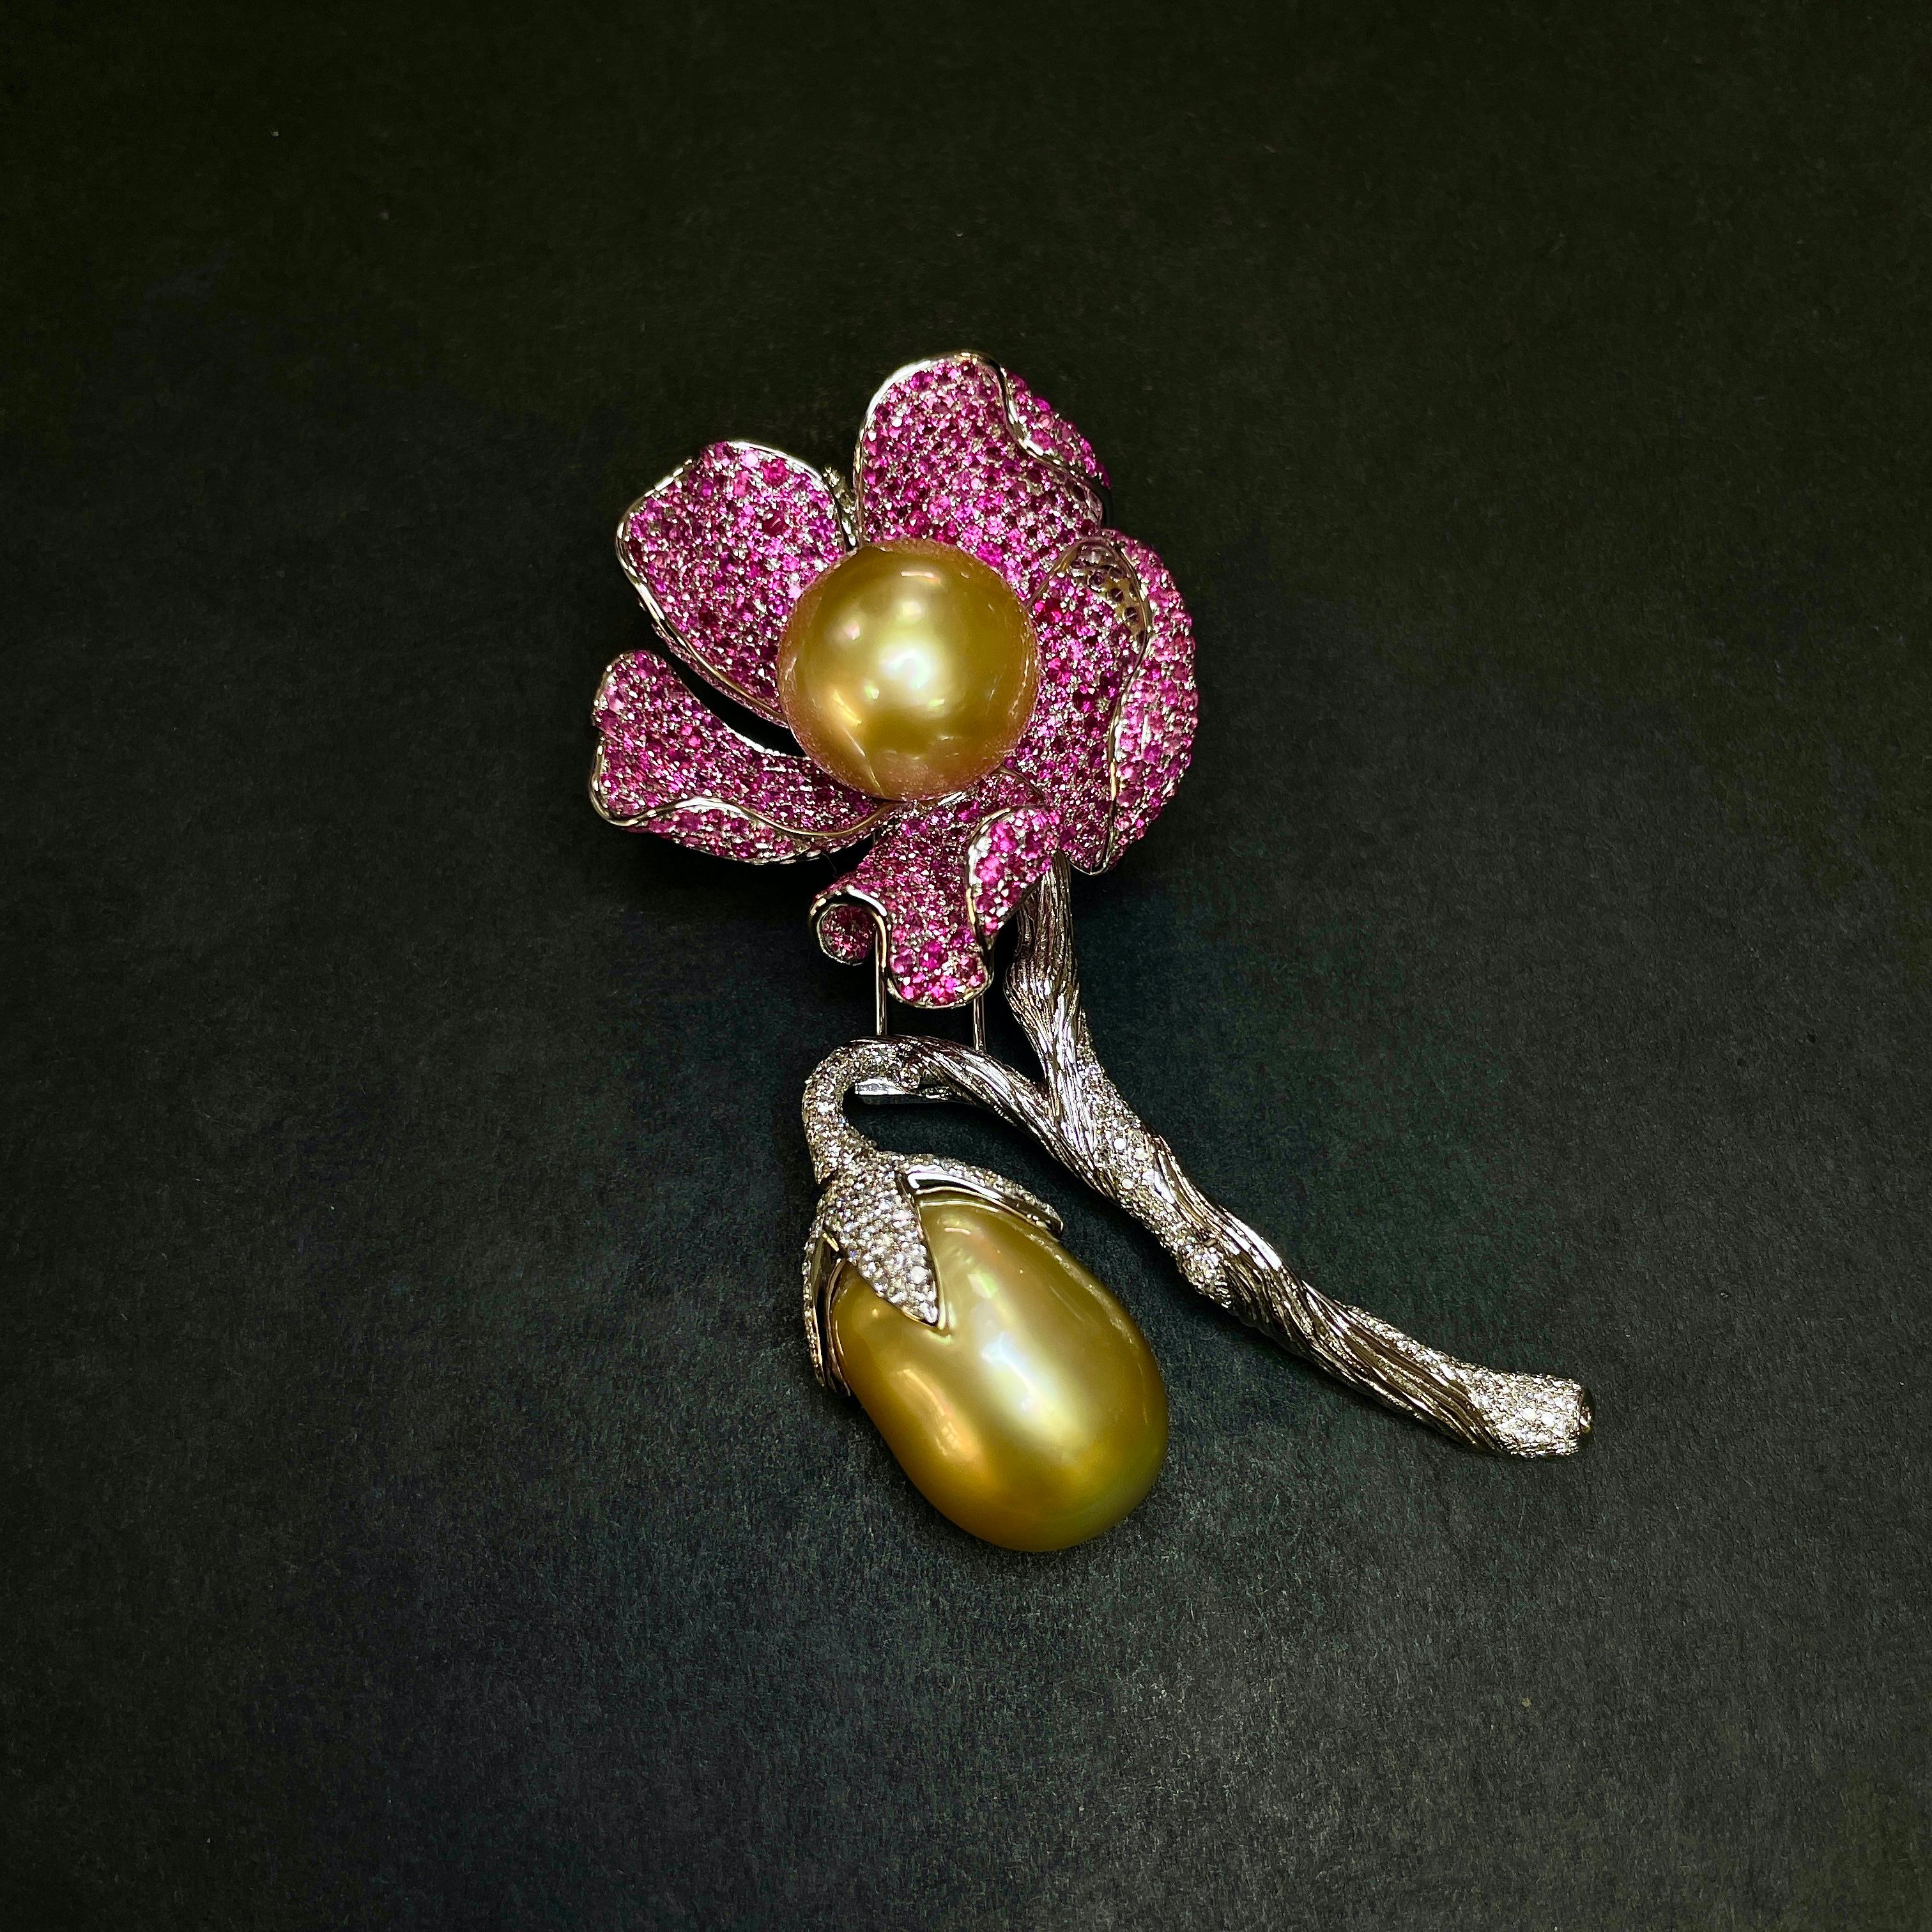 A fruiting and blossoming Brooch with Golden South Sea Pearl, Pink Sapphire and Diamond pave. The Round Golden South Sea pearls is surrounded by 5 petal motifs encrusted in pink sapphire, while the fruit is branching out from the main stem which the